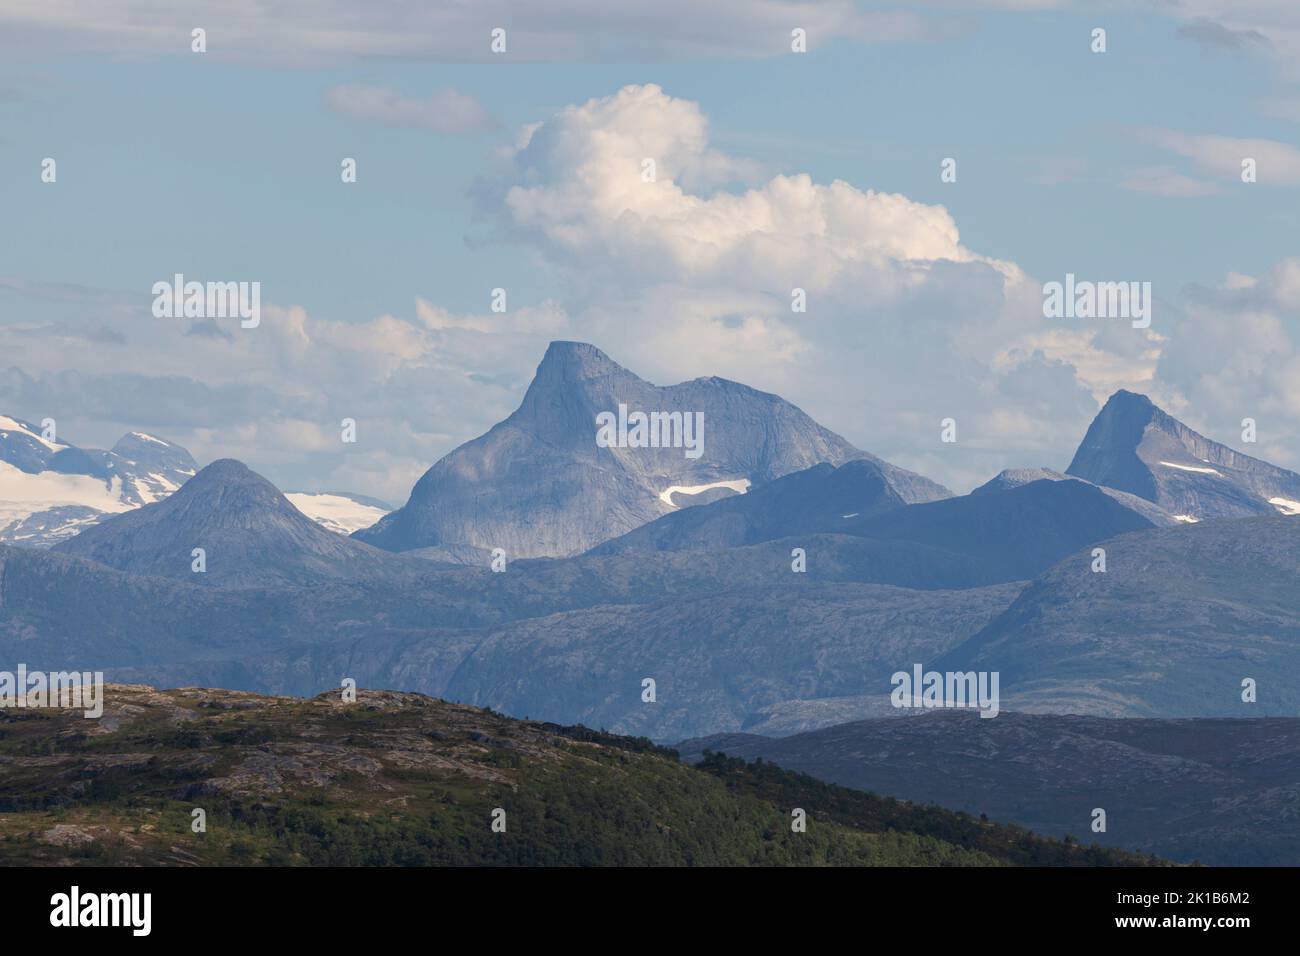 Nature of Norway, wooded landscape with high mountains in the background and green hills in the foreground. Stock Photo